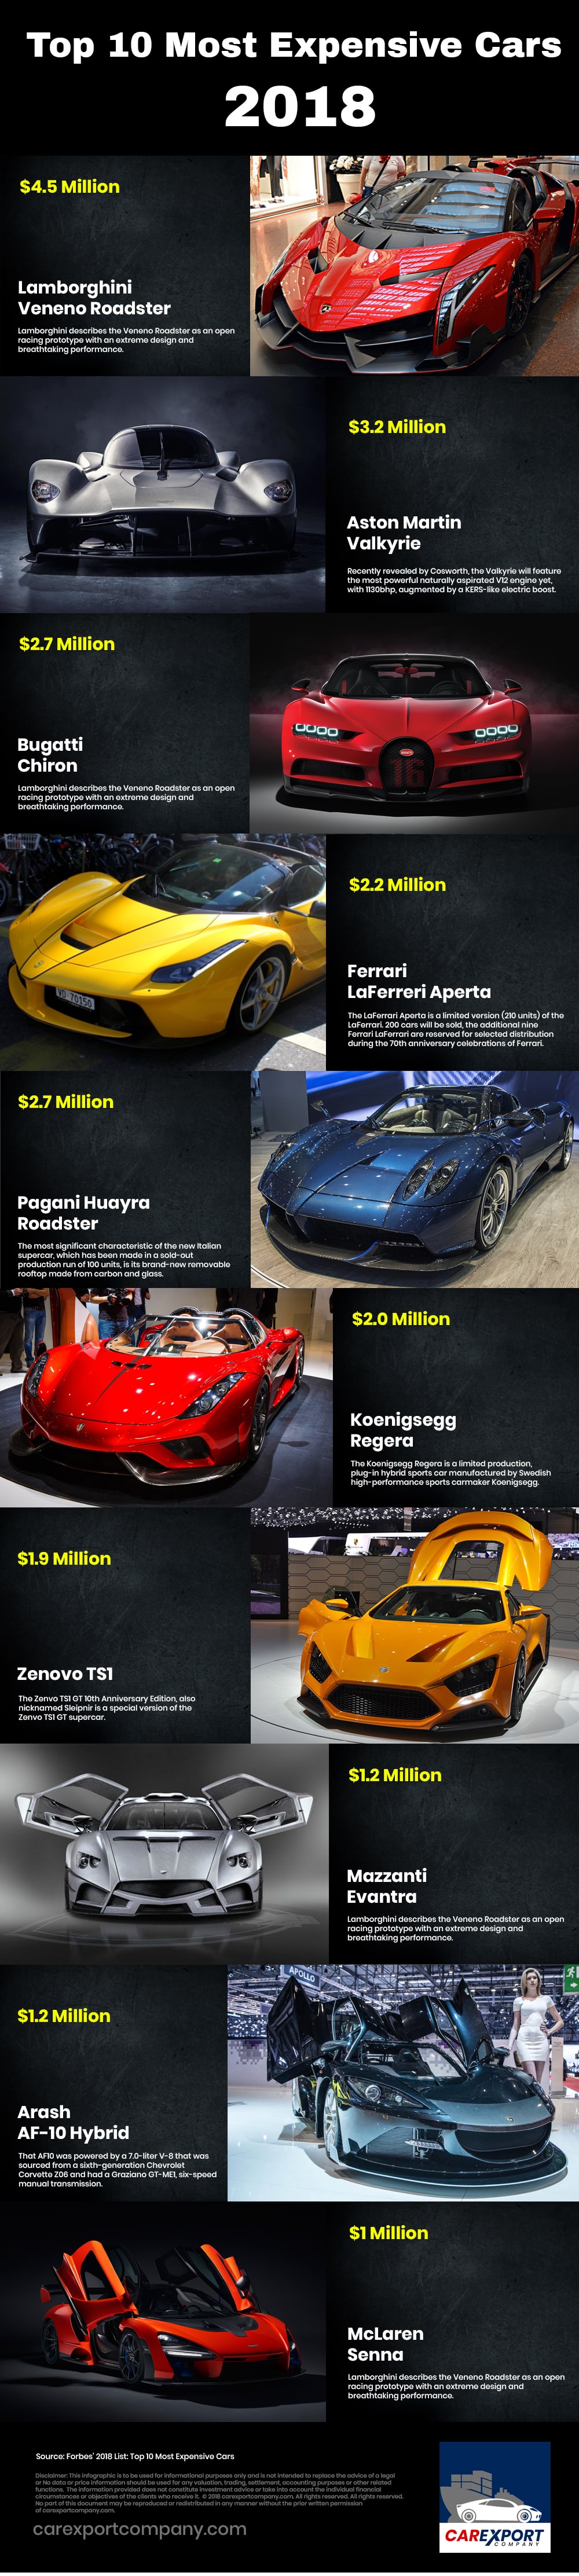 Top 10 Most Expensive Cars 2018